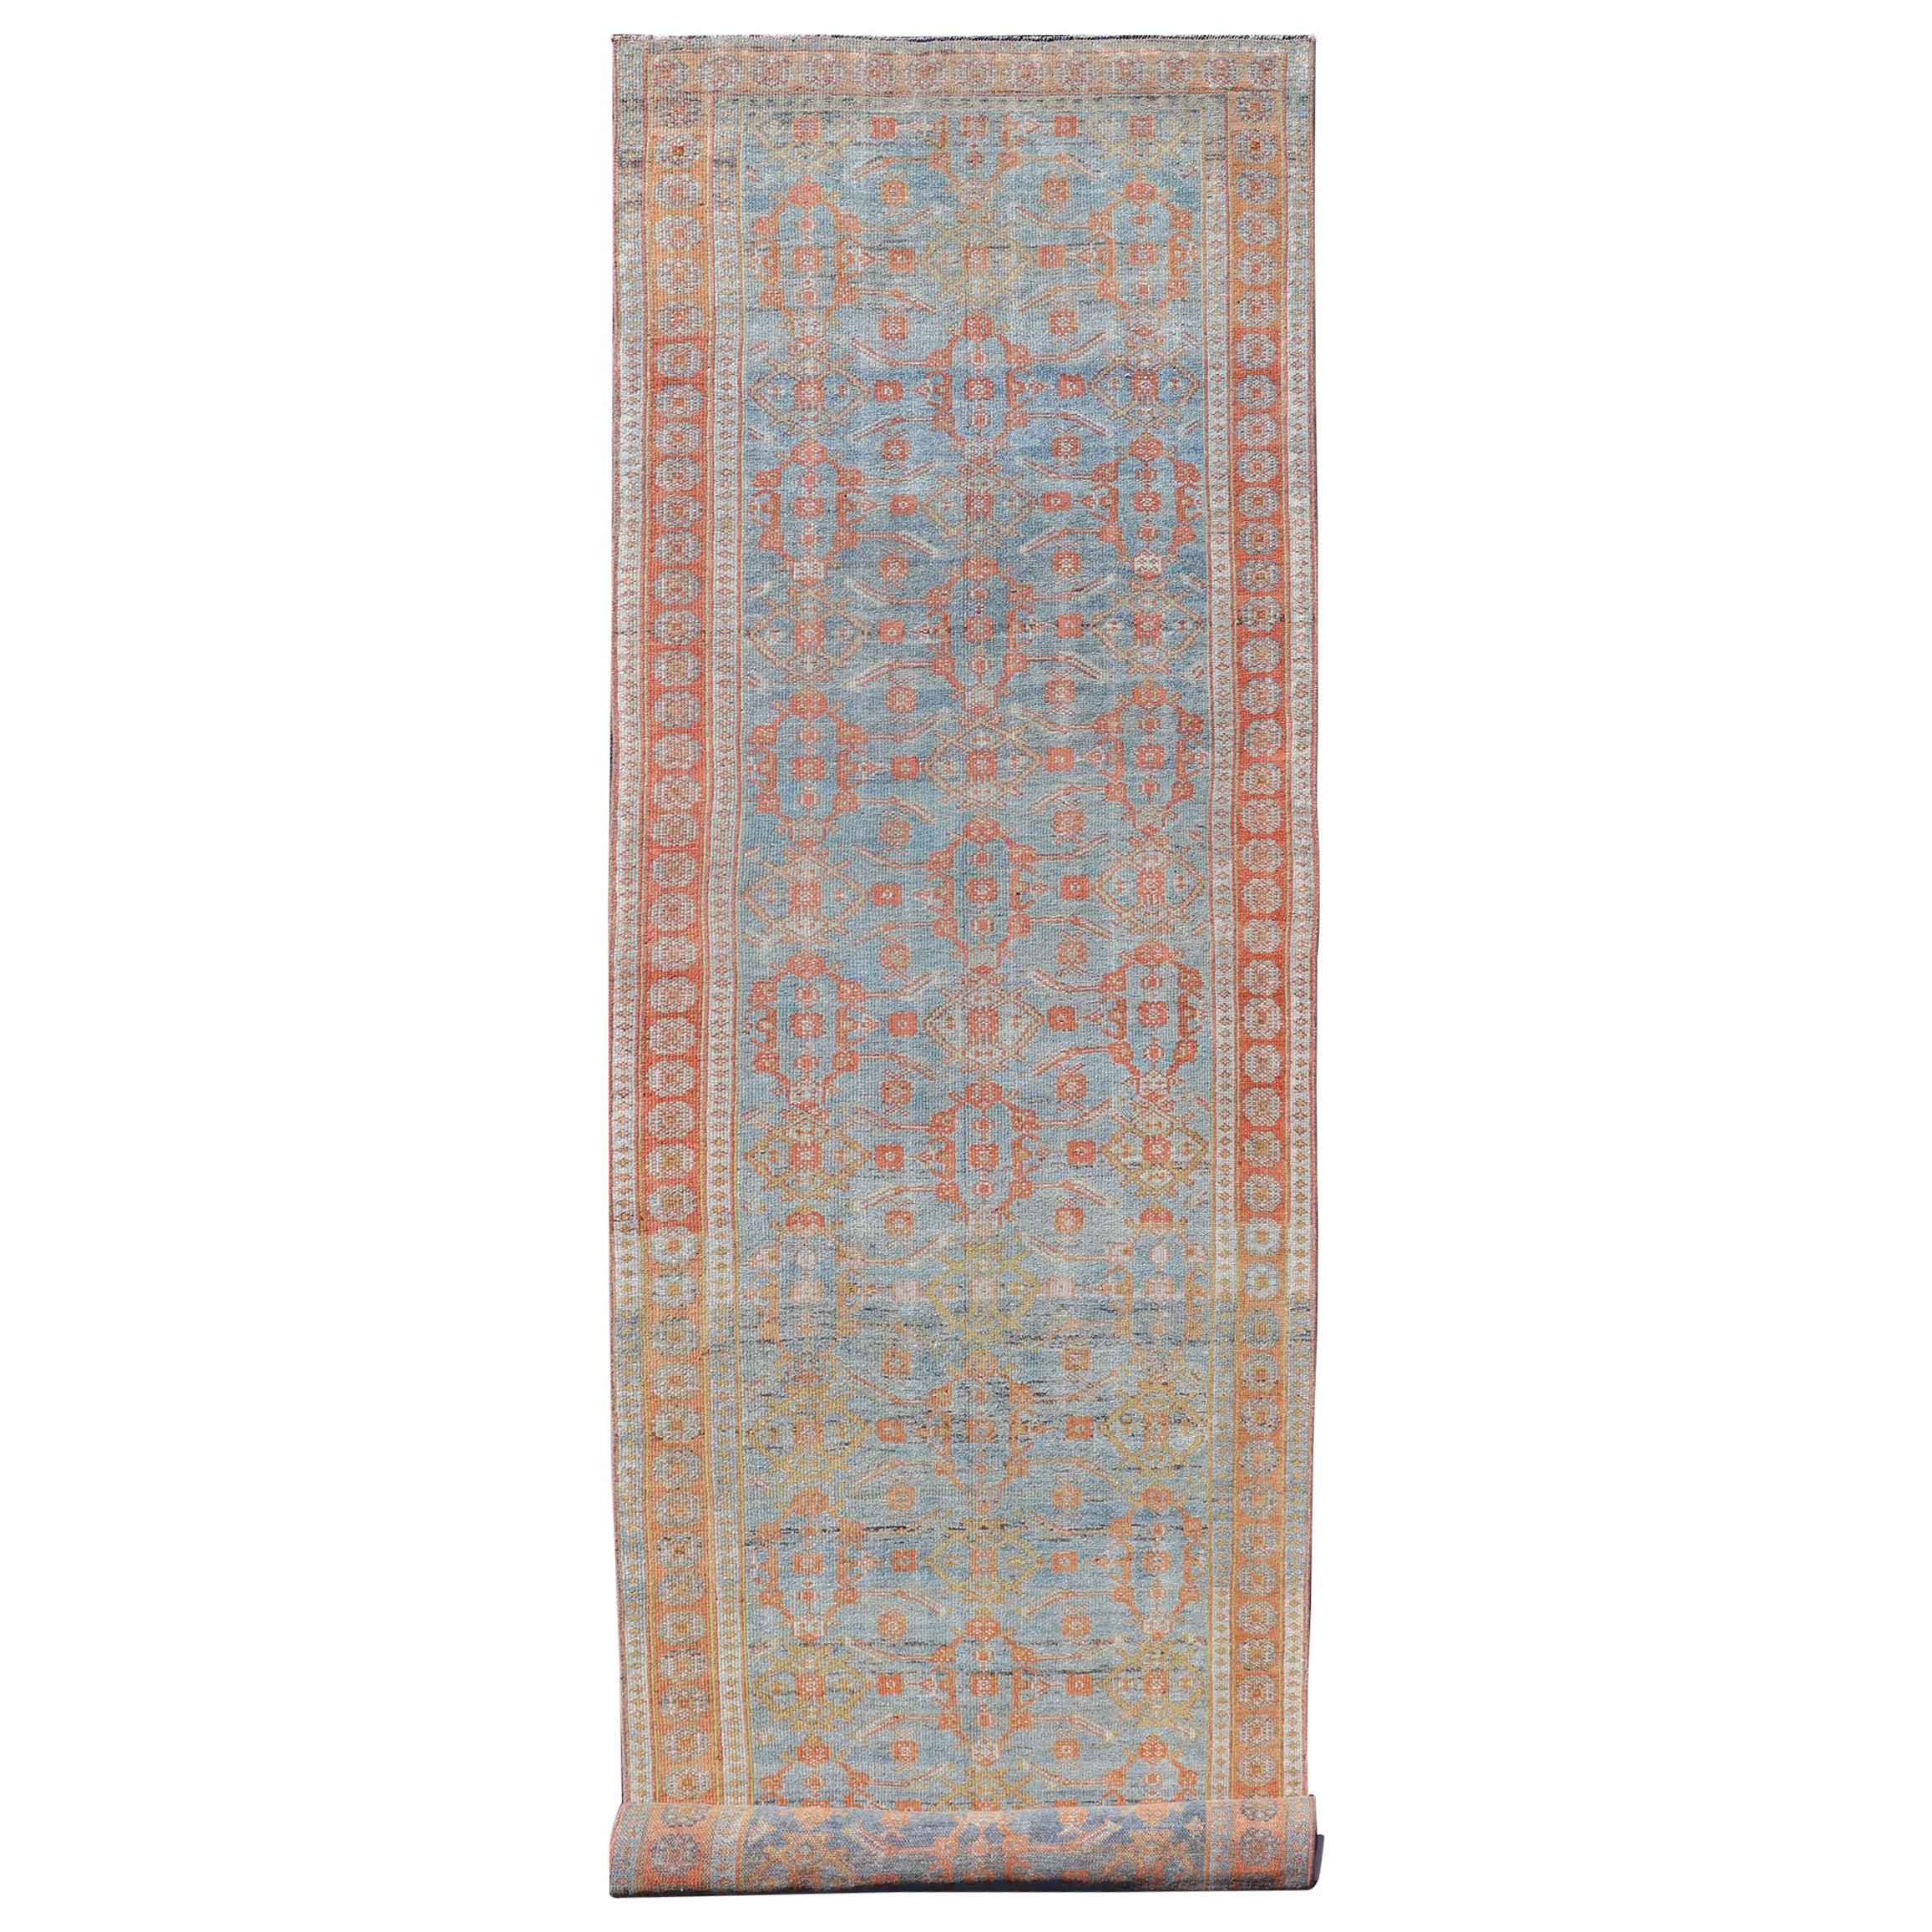  Antique Persian Long Runner with Blossoming Geometric Design in Light Blue